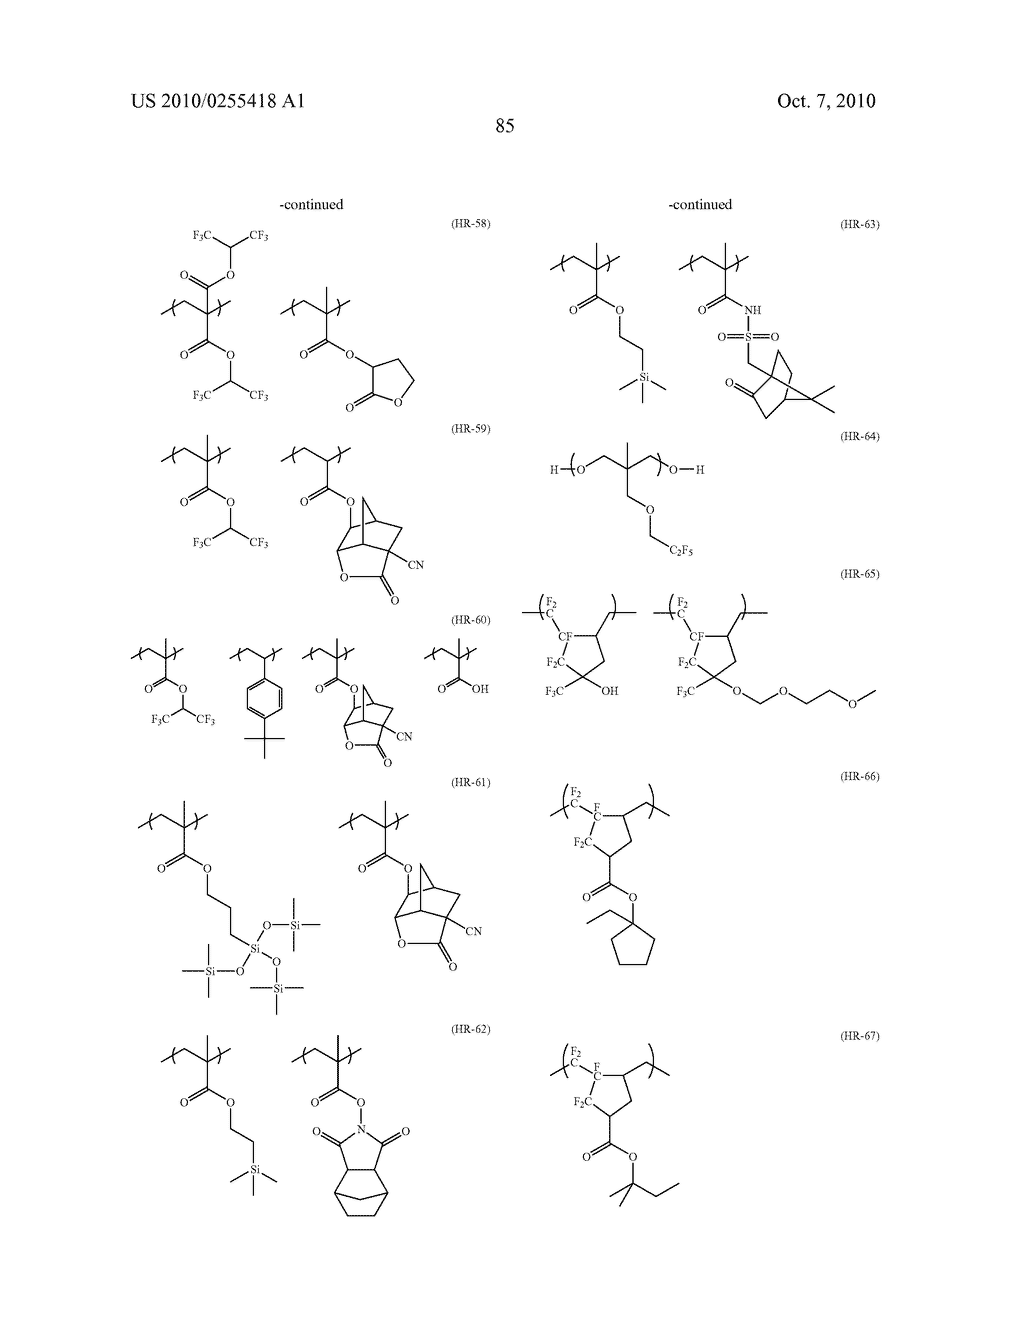 ACTINIC-RAY- OR RADIATION-SENSITIVE RESIN COMPOSITION AND METHOD OF FORMING PATTERN THEREWITH - diagram, schematic, and image 89